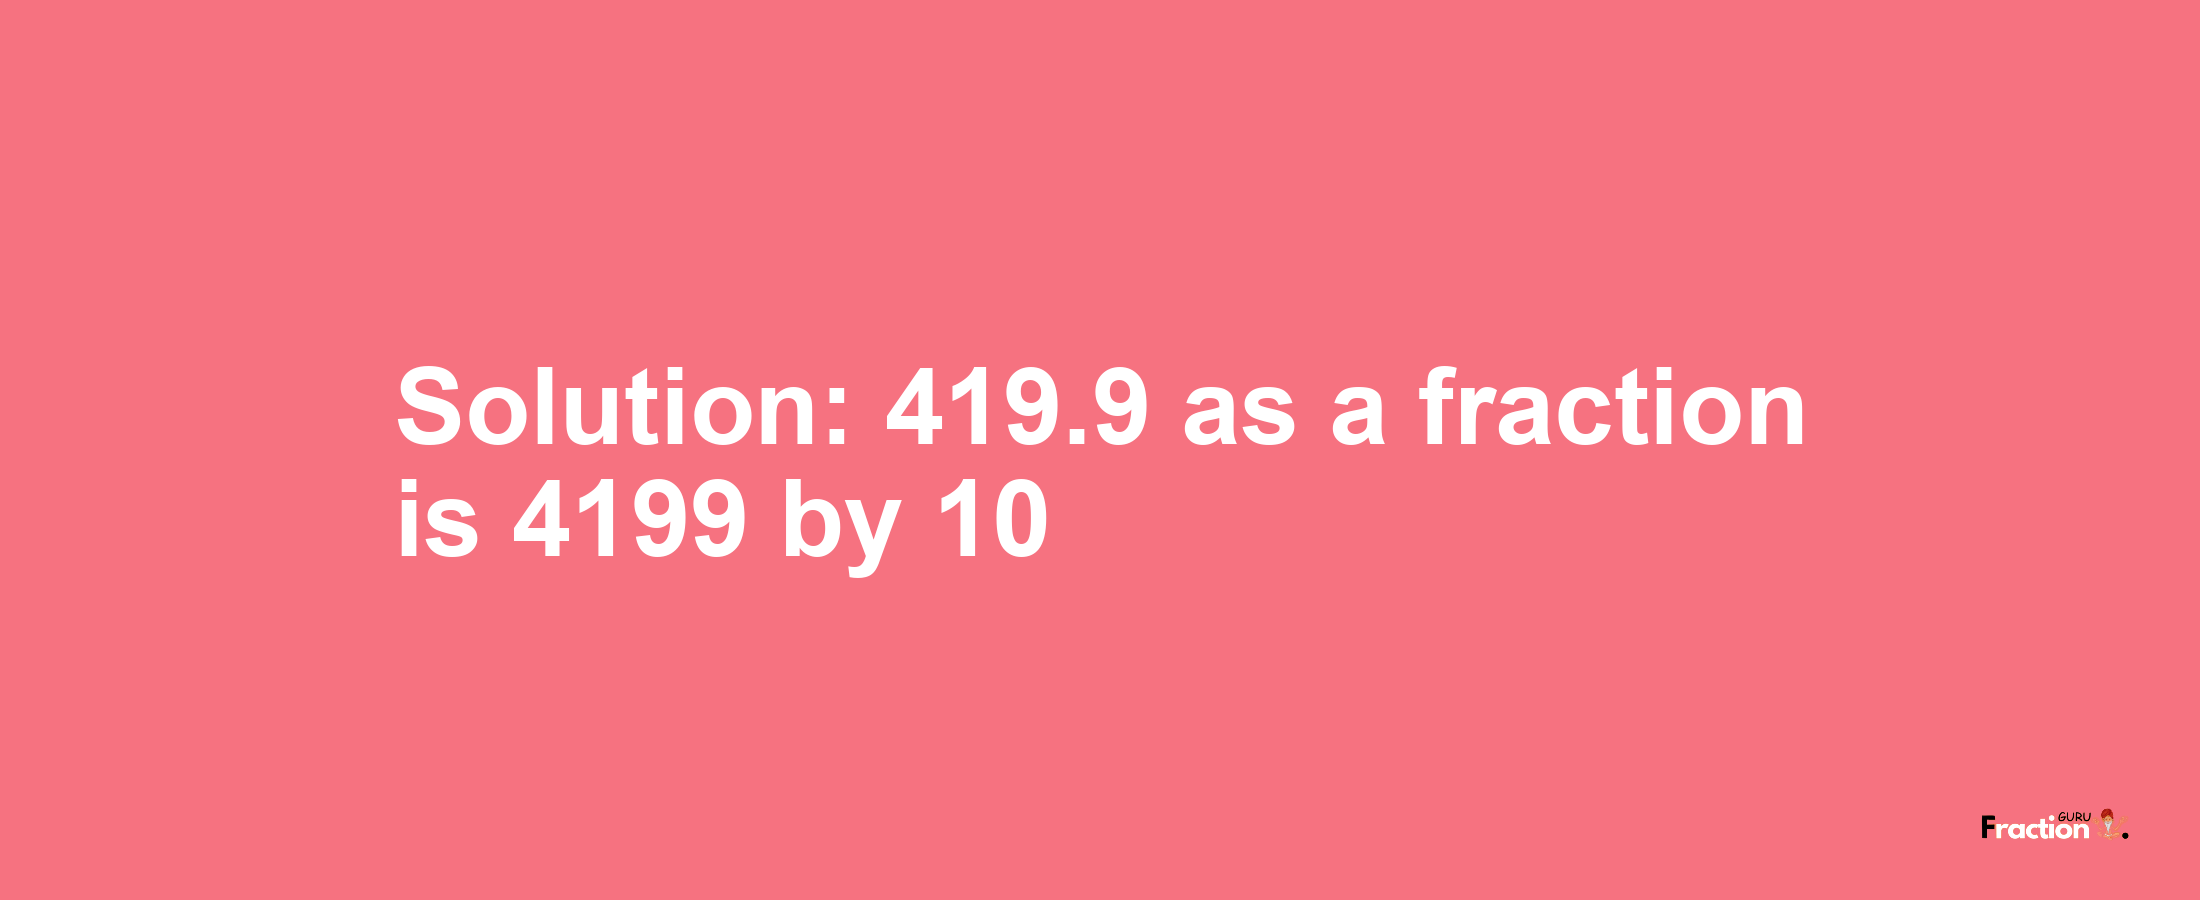 Solution:419.9 as a fraction is 4199/10